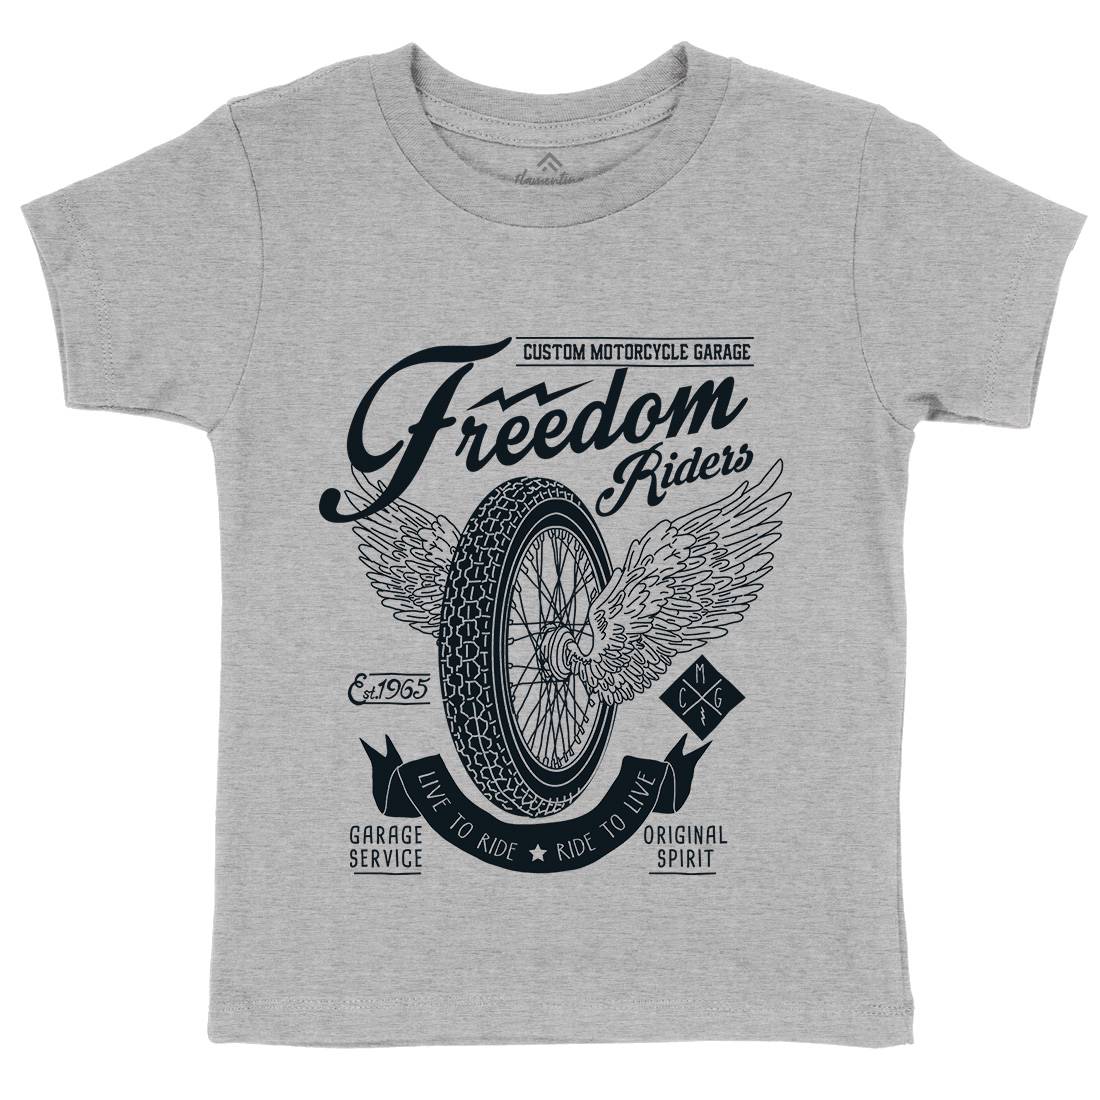 Freedom Riders Kids Organic Crew Neck T-Shirt Motorcycles A989